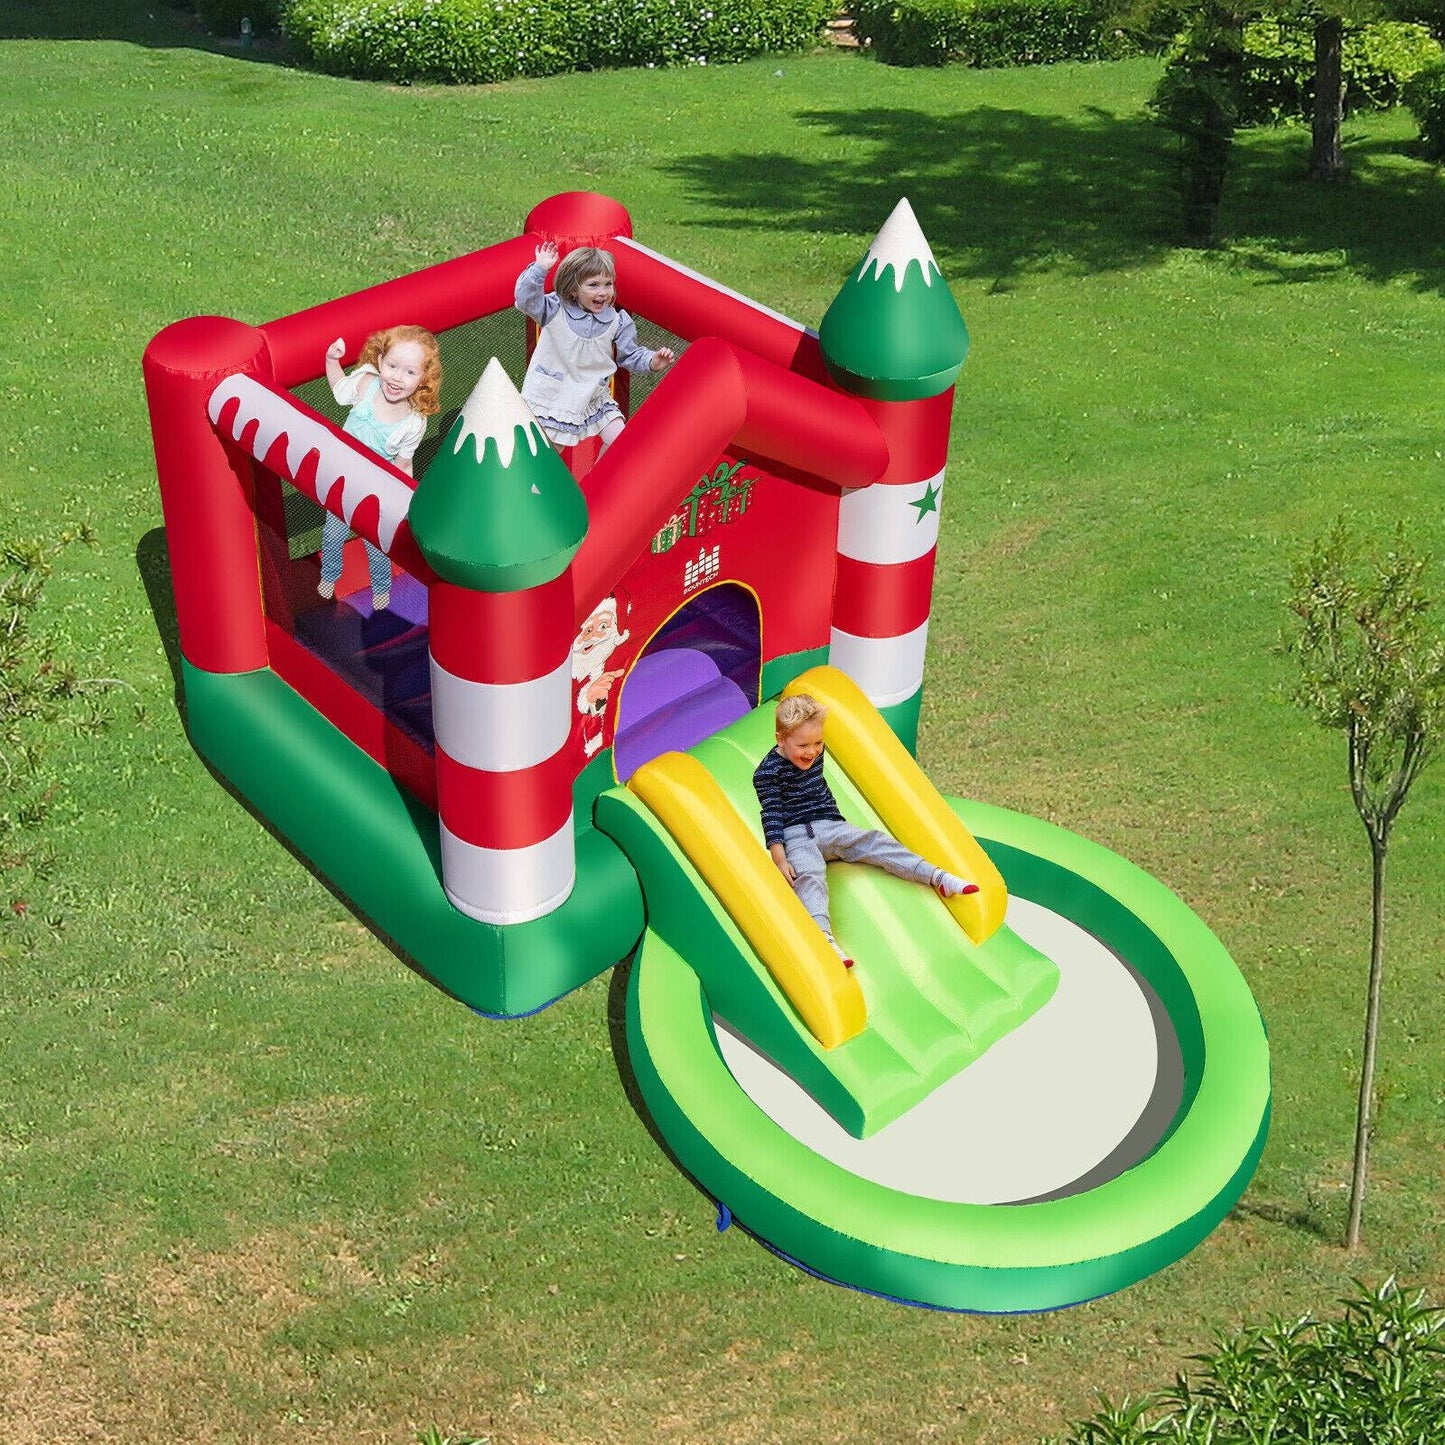 Inflatable Bounce House with Blower for Kids Aged 3-10 Years